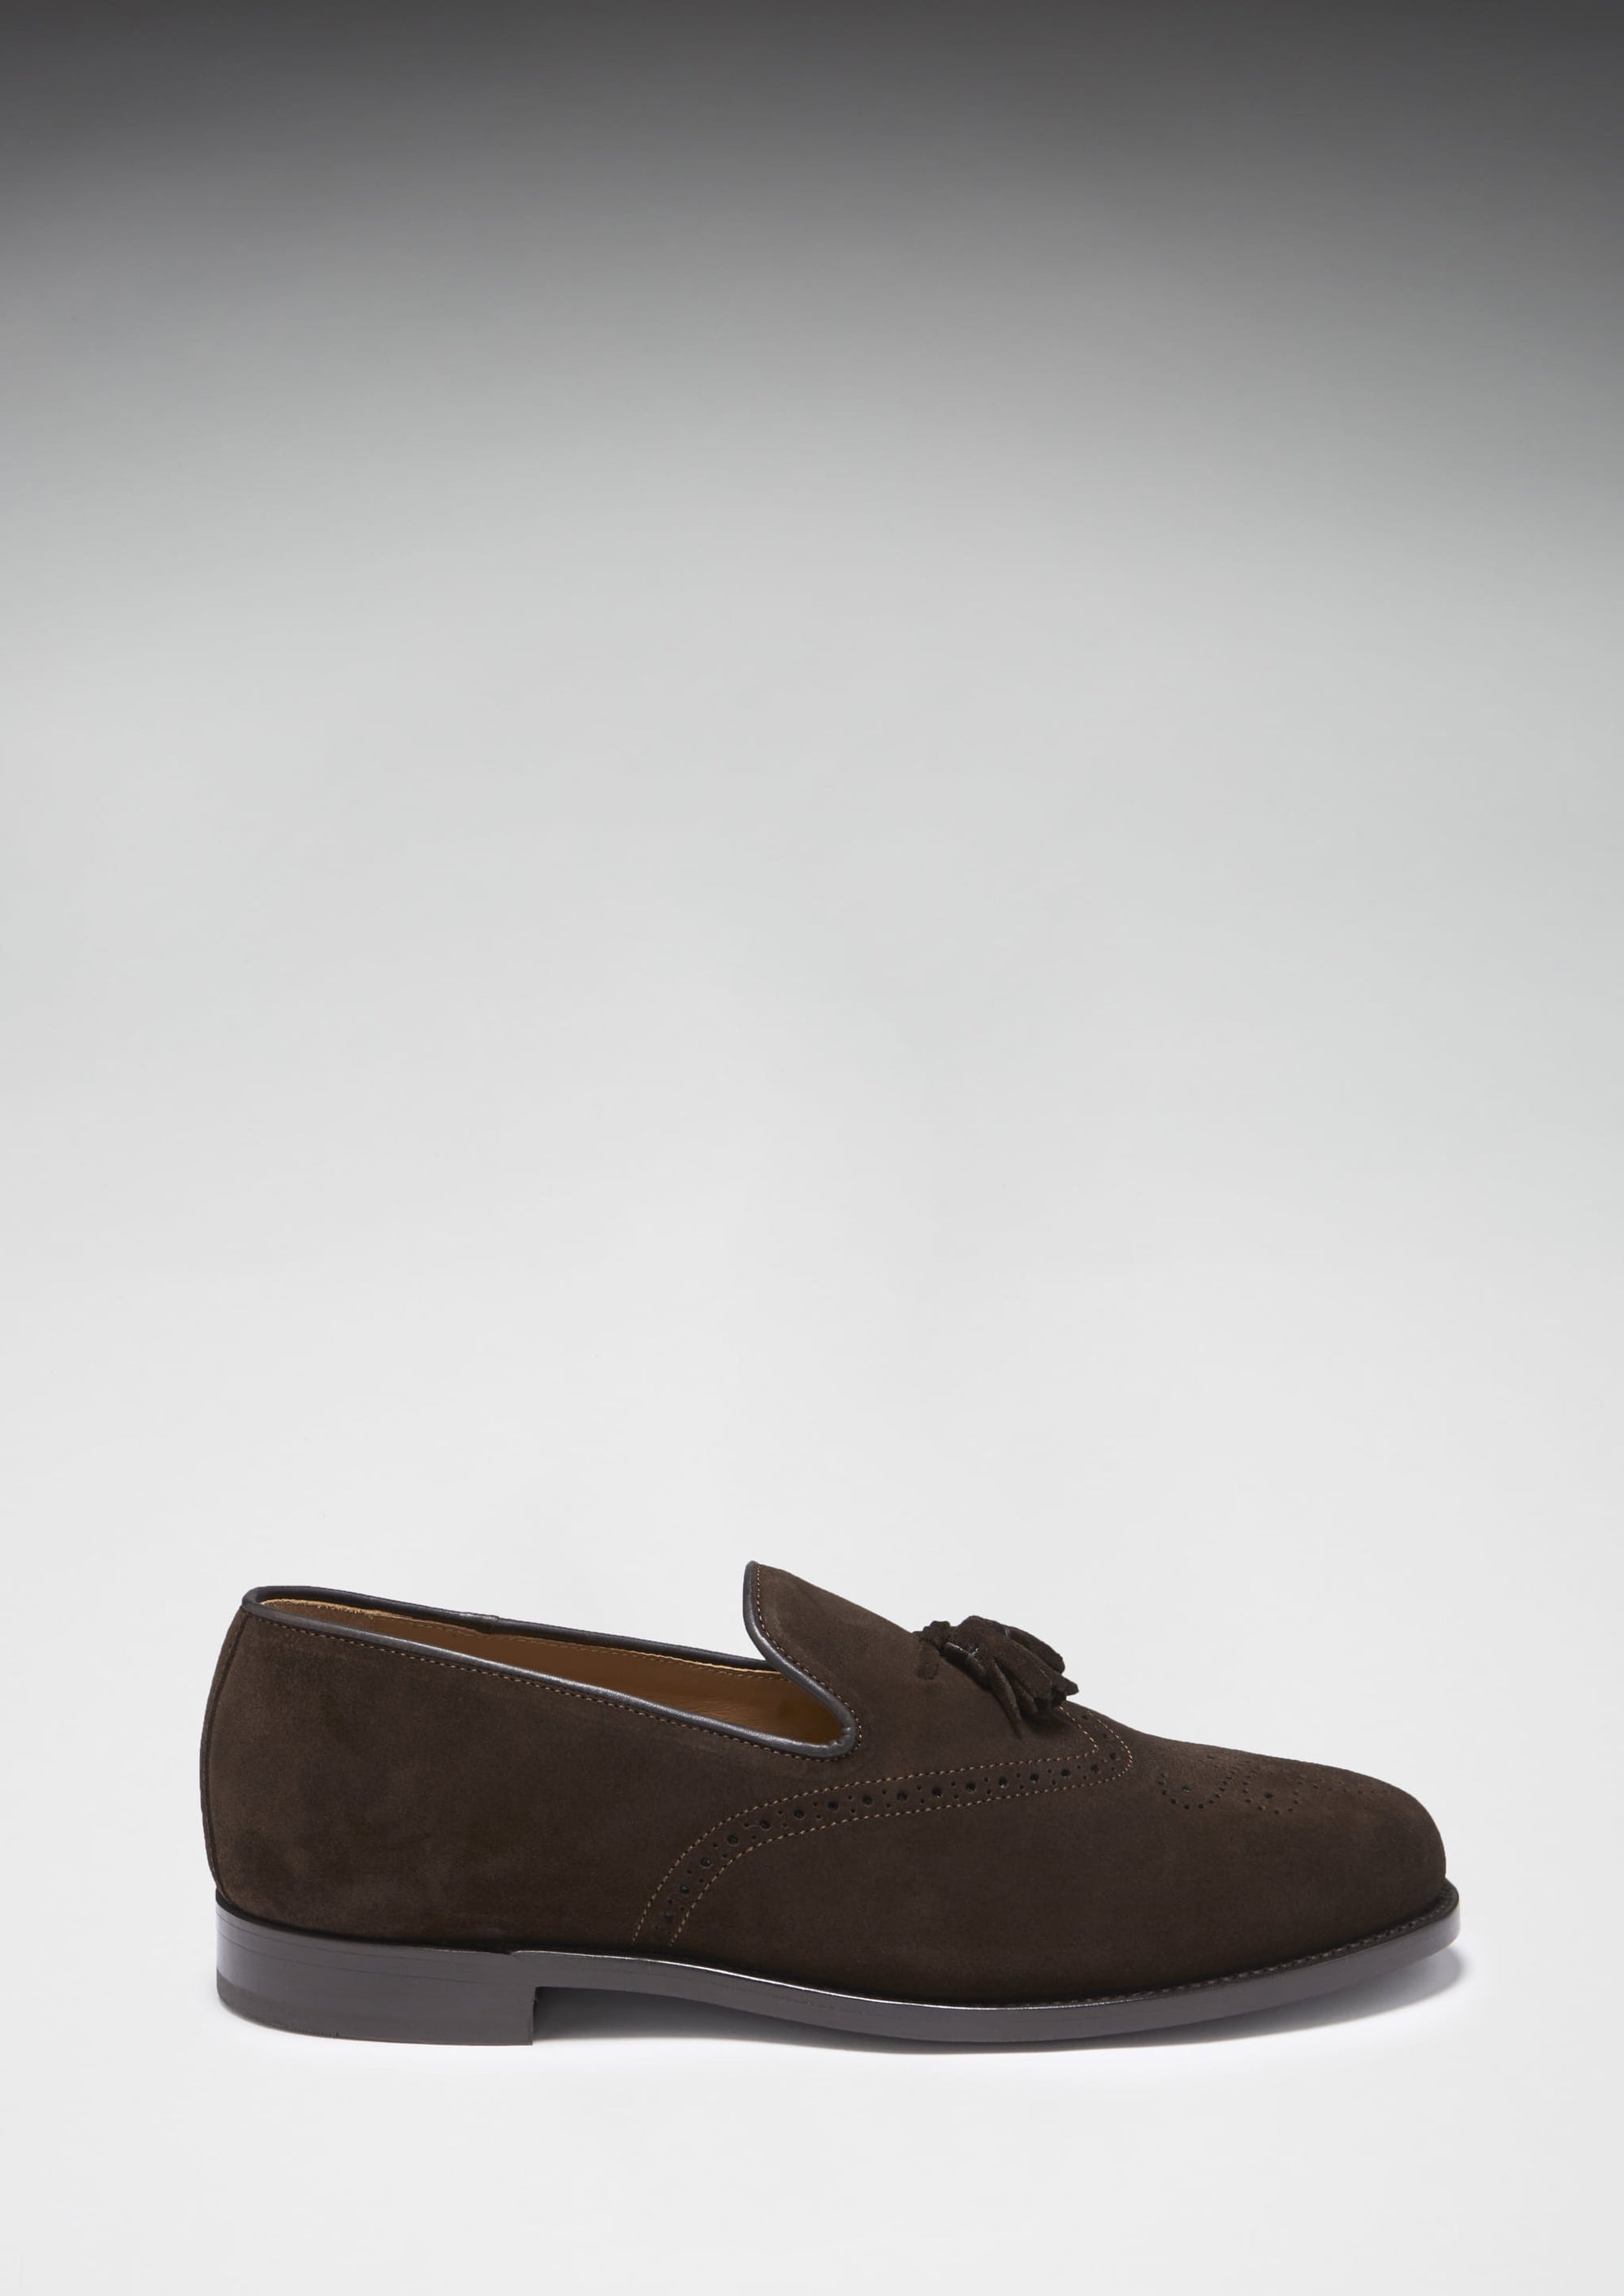 Brown Suede Tasselled Brogues, Welted Leather Sole